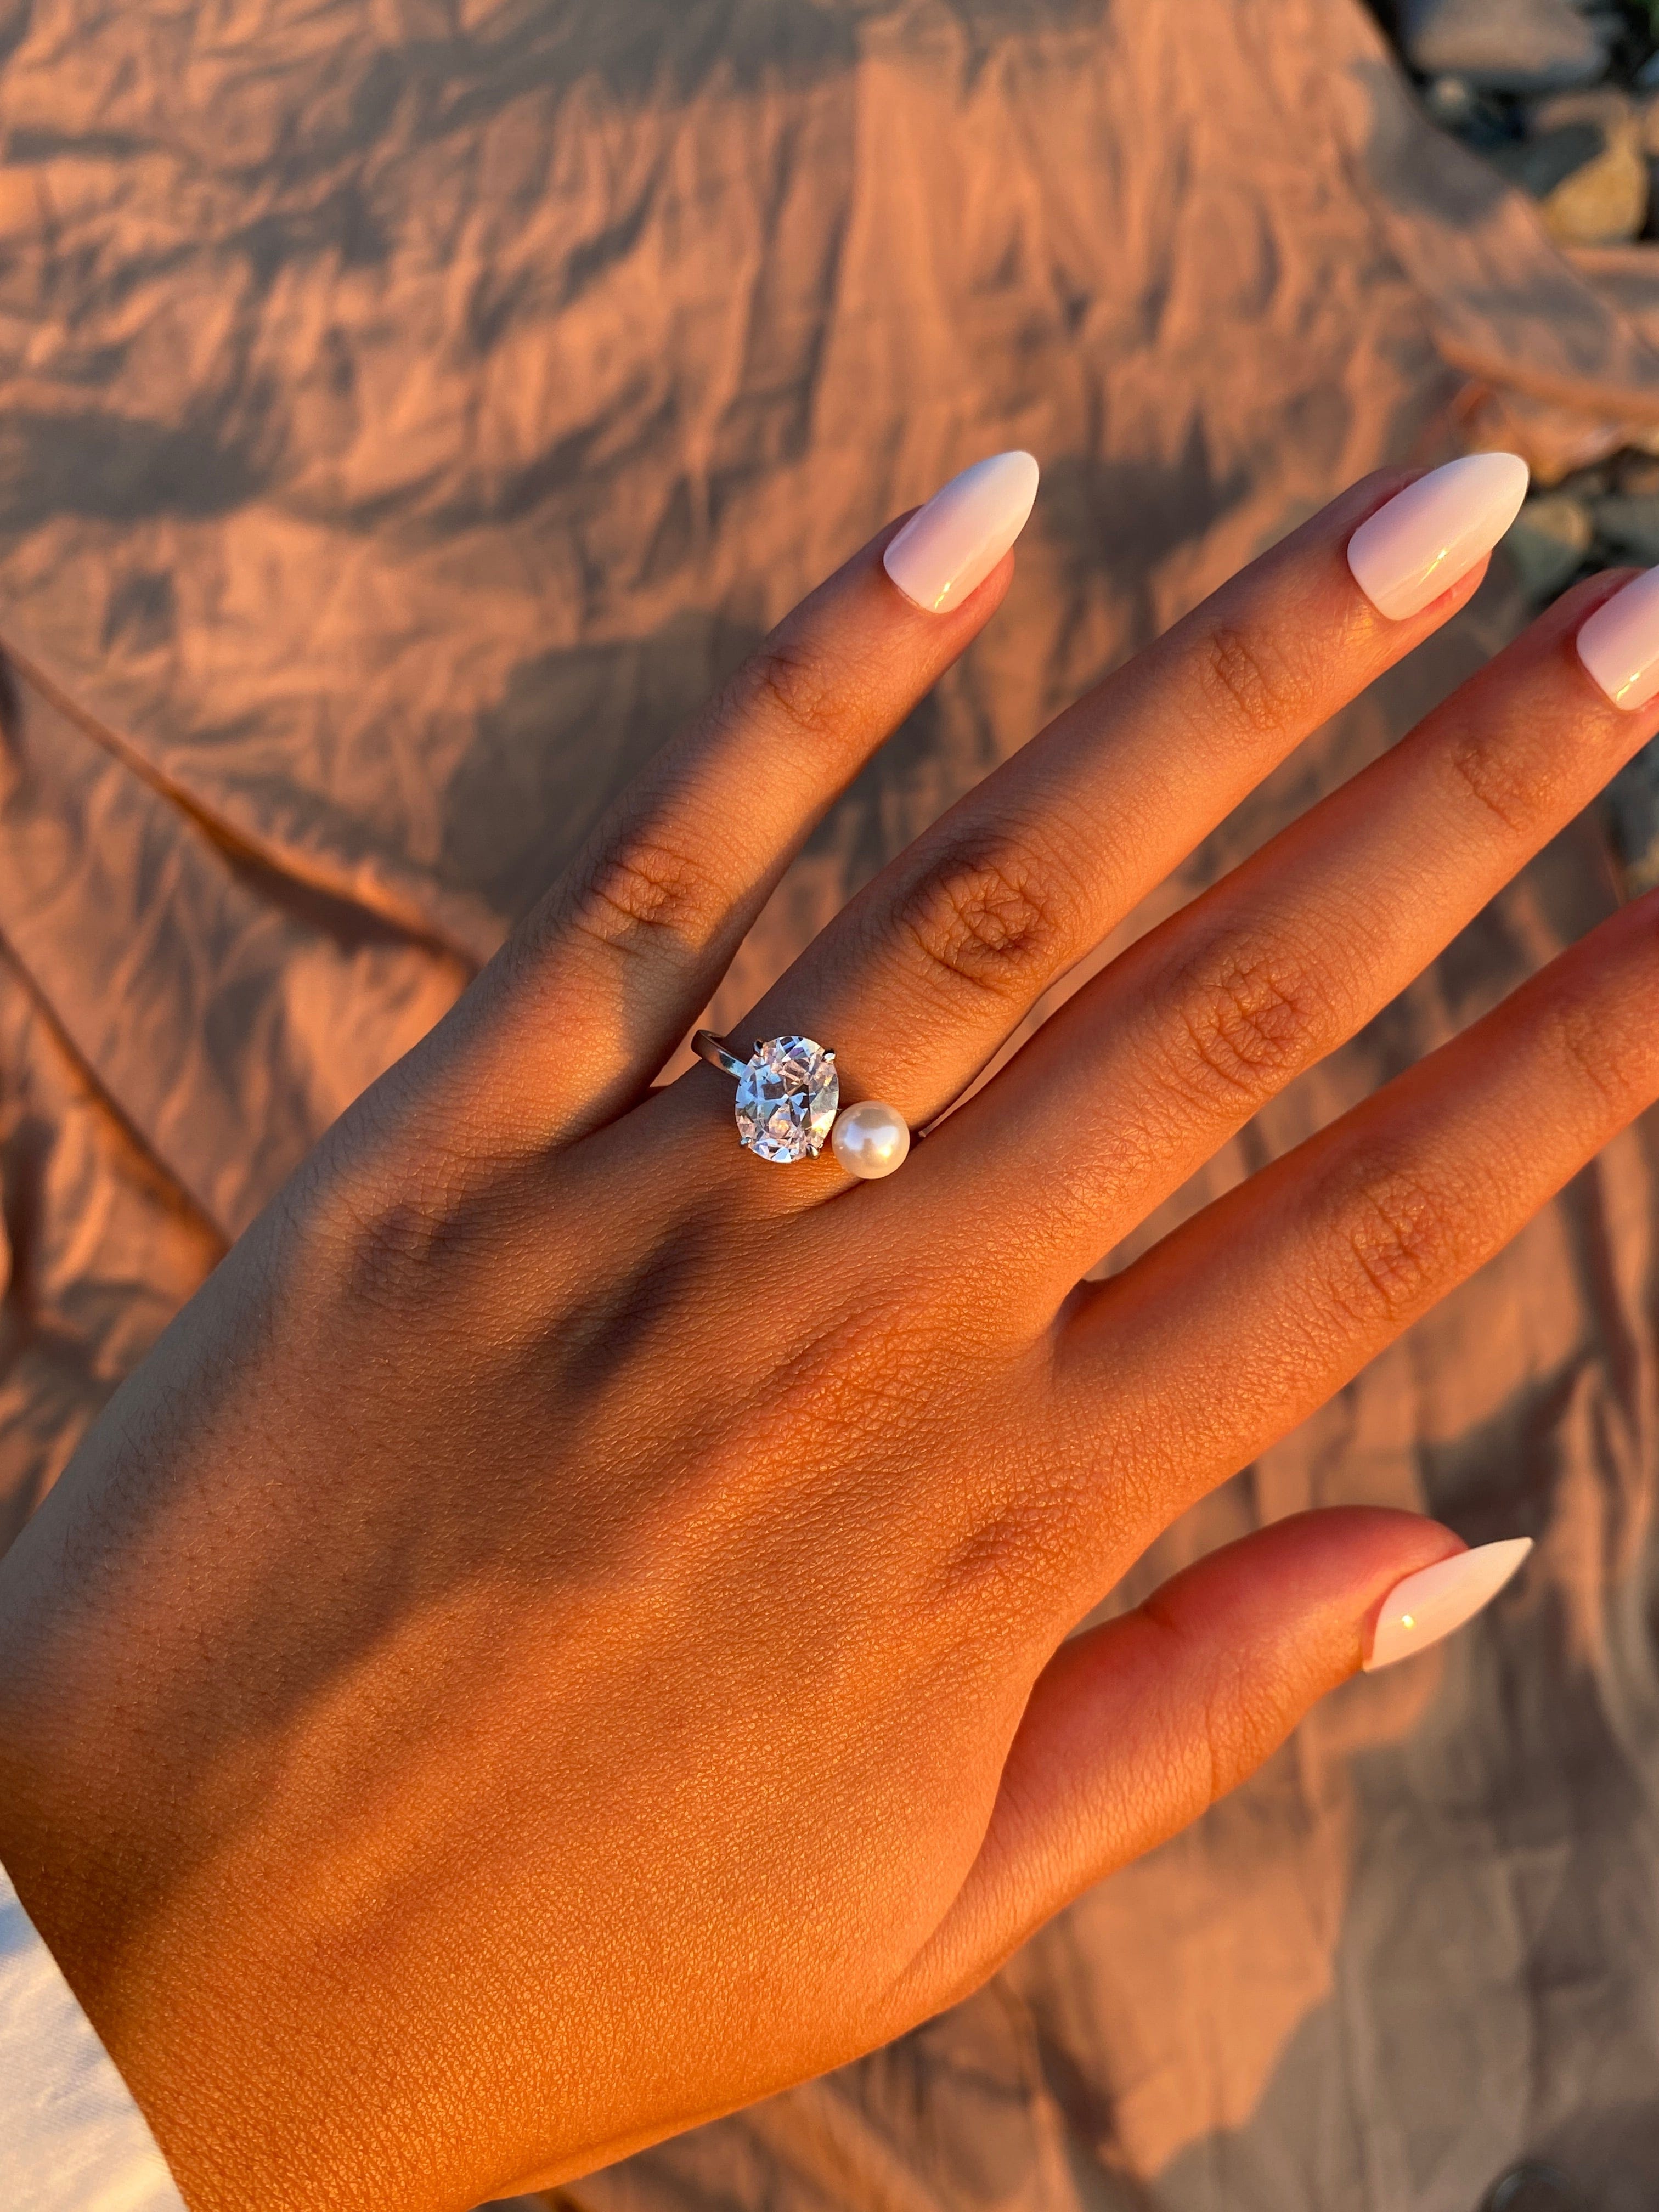 Ariana Grande's Engagement Ring Has A Touching Story Behind It